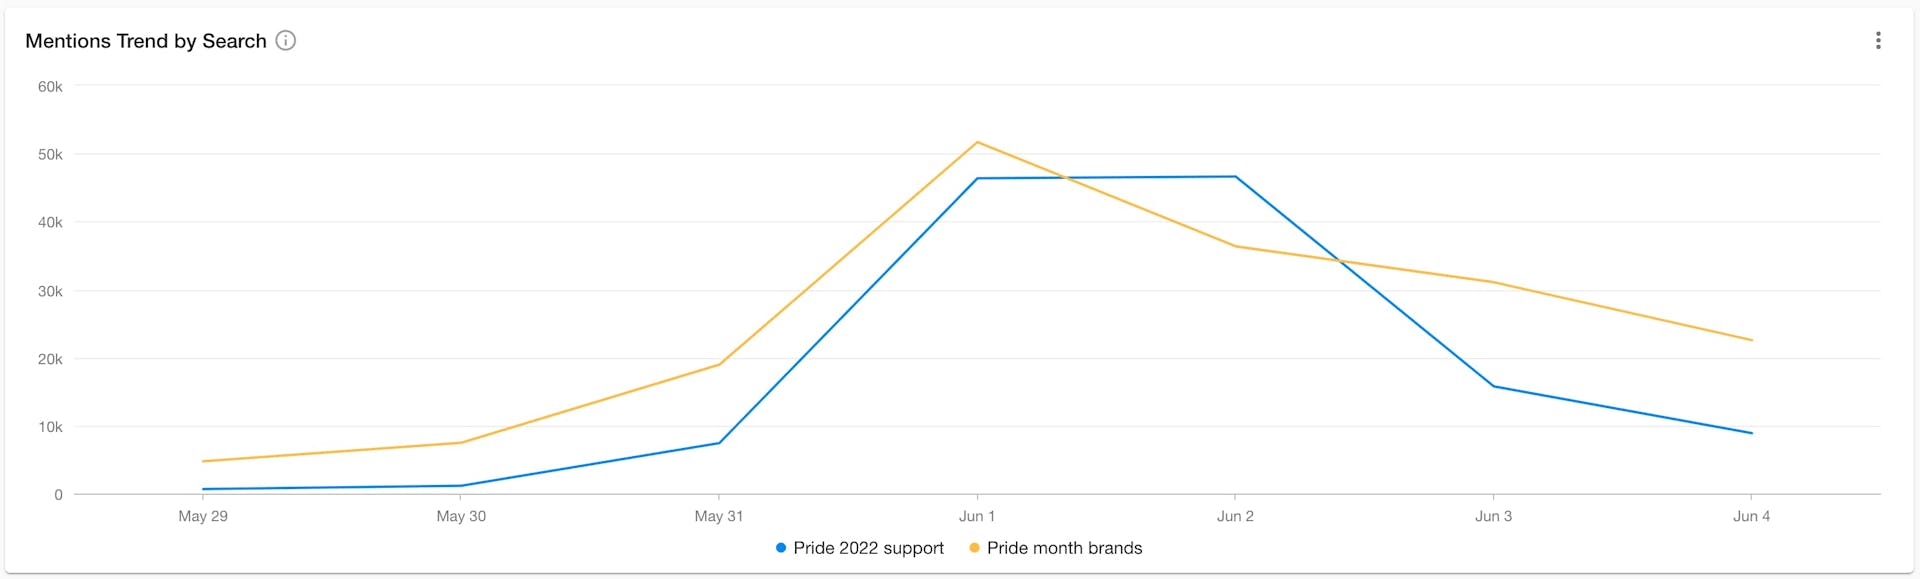 A line graph showing the similar rise and fall of conversations about brands and support around the beginning of Pride Month.